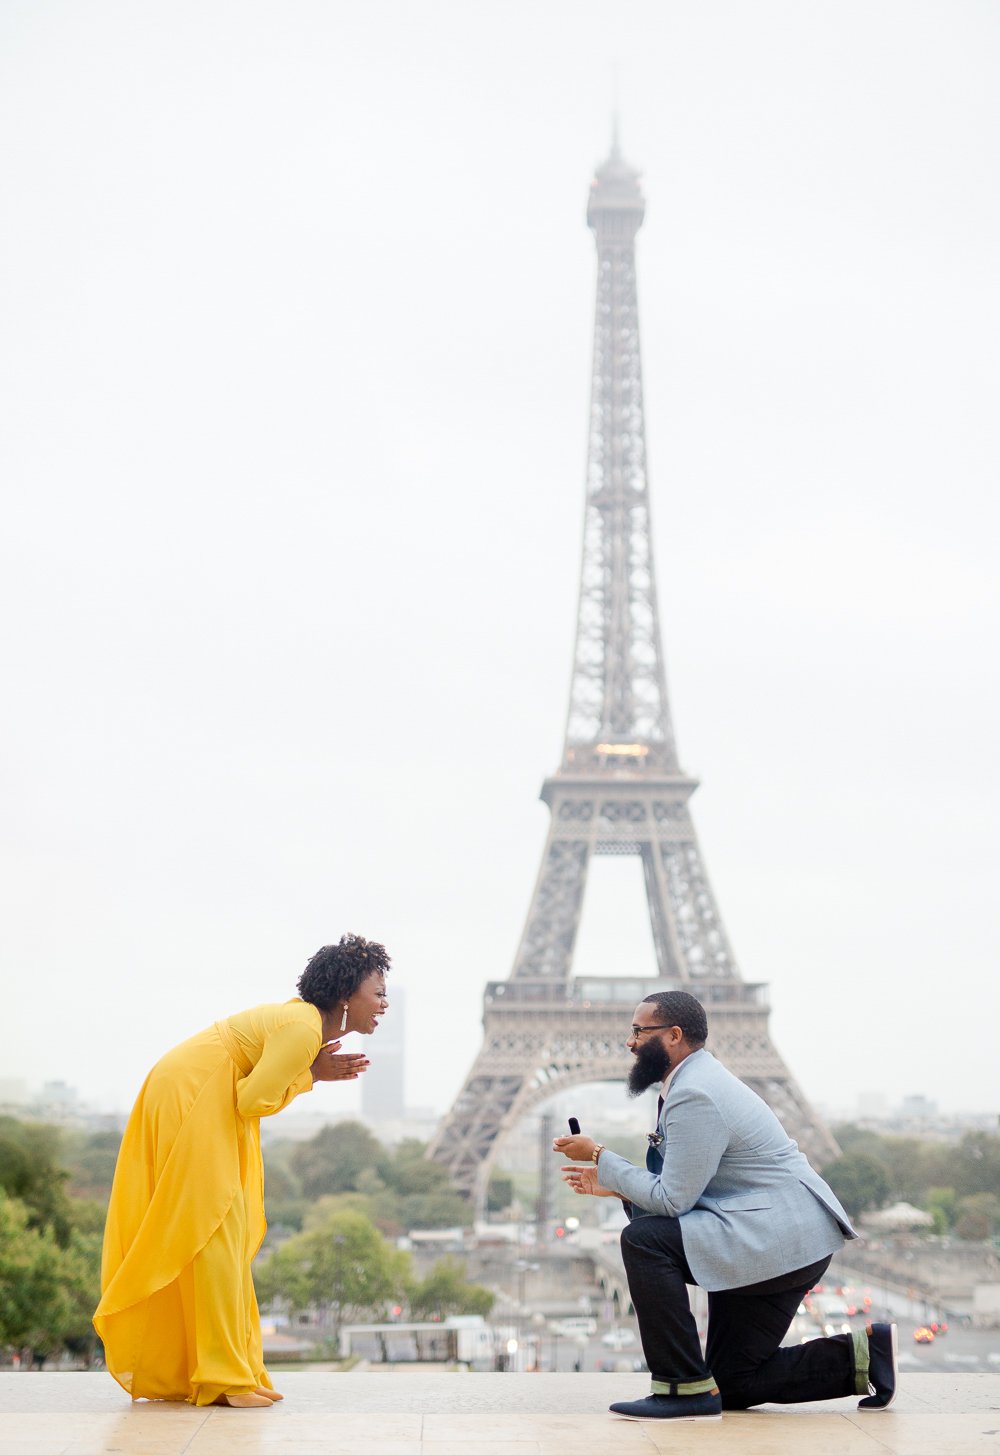 winter-proposal-at-the-eiffel-tower-trocadero---Paris-photographer_007_katie-donnelly-photography.jpg